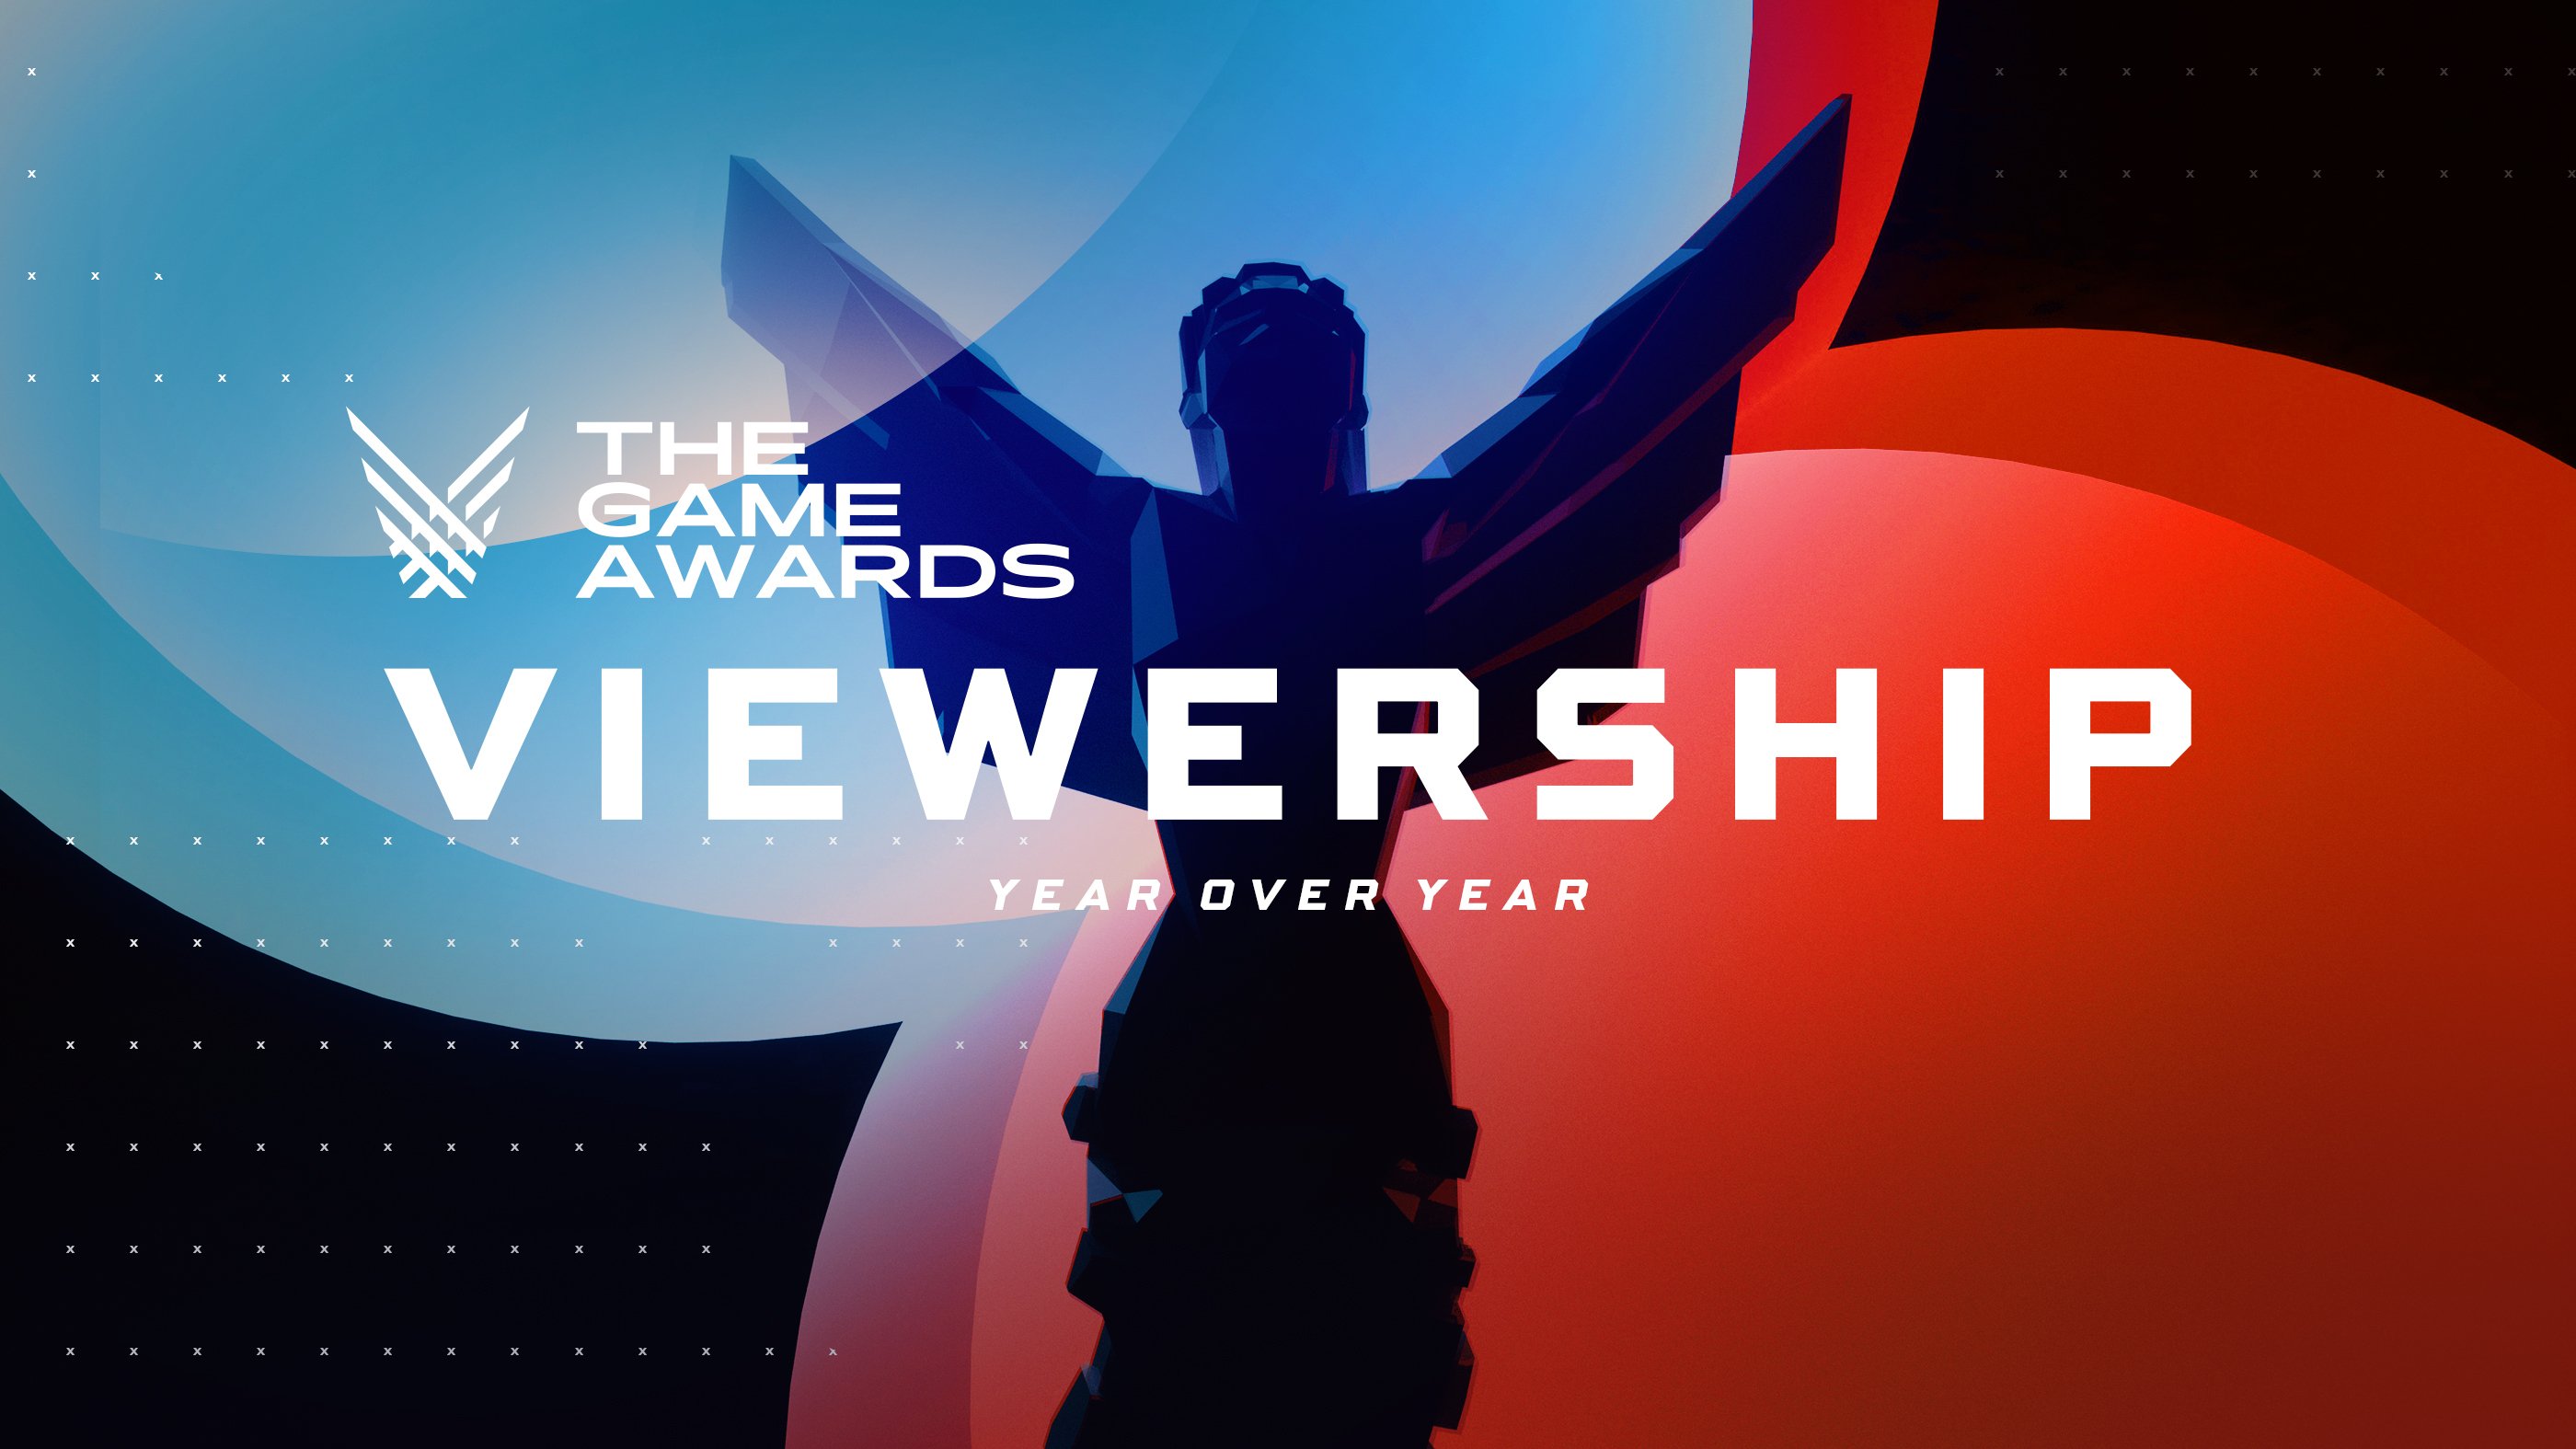 The Game Awards doubles viewership to 26 million livestreams